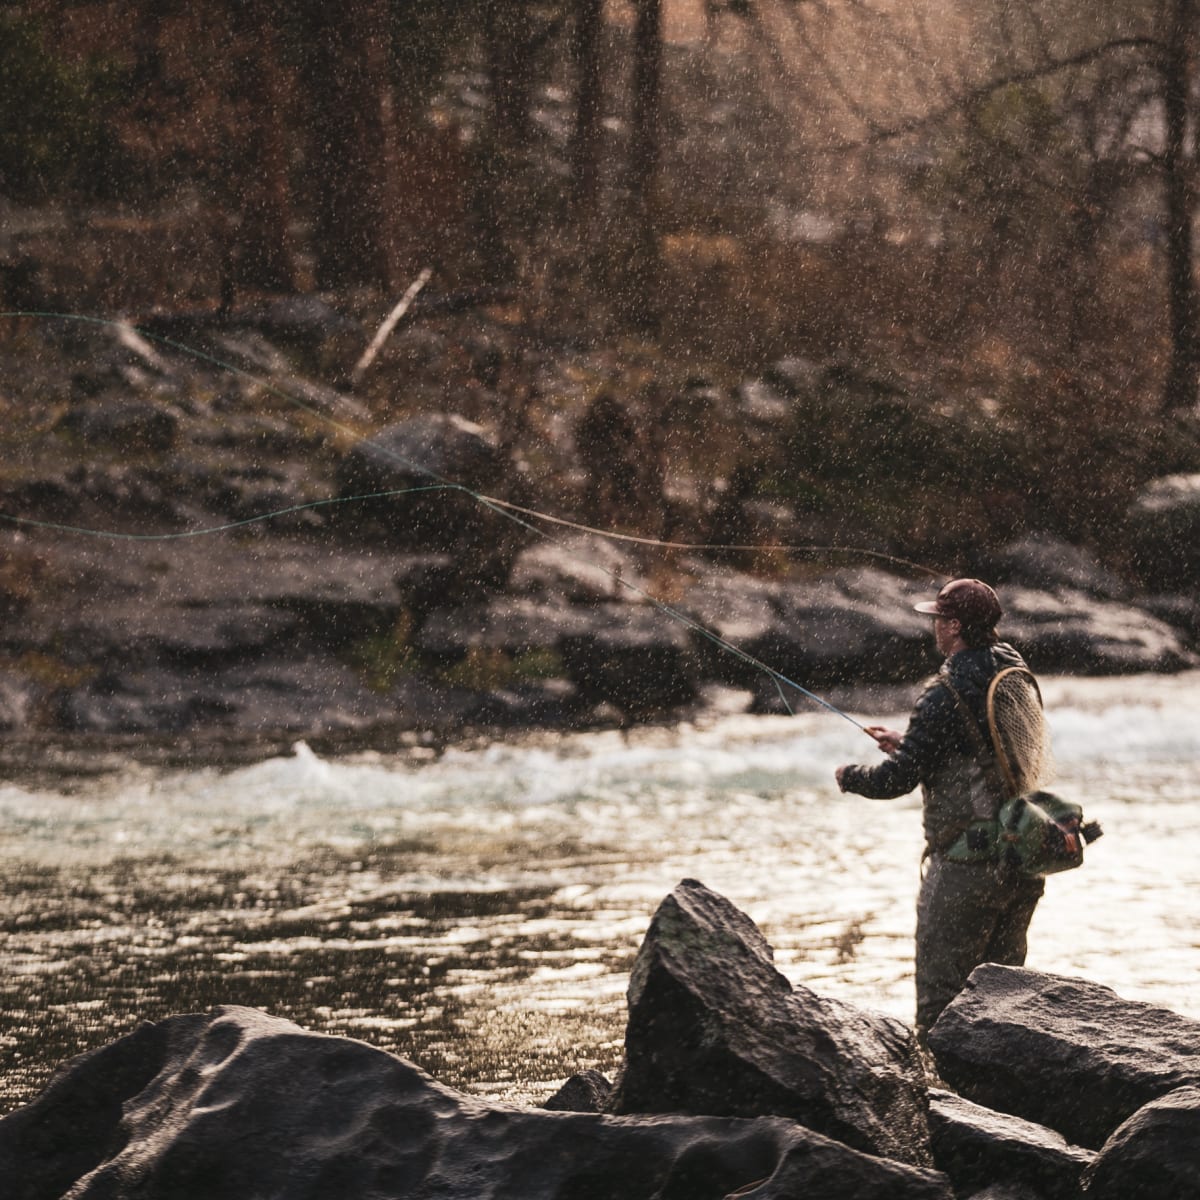 The Ultimate Fly Fishing Rod For People On The Go - Men's Journal